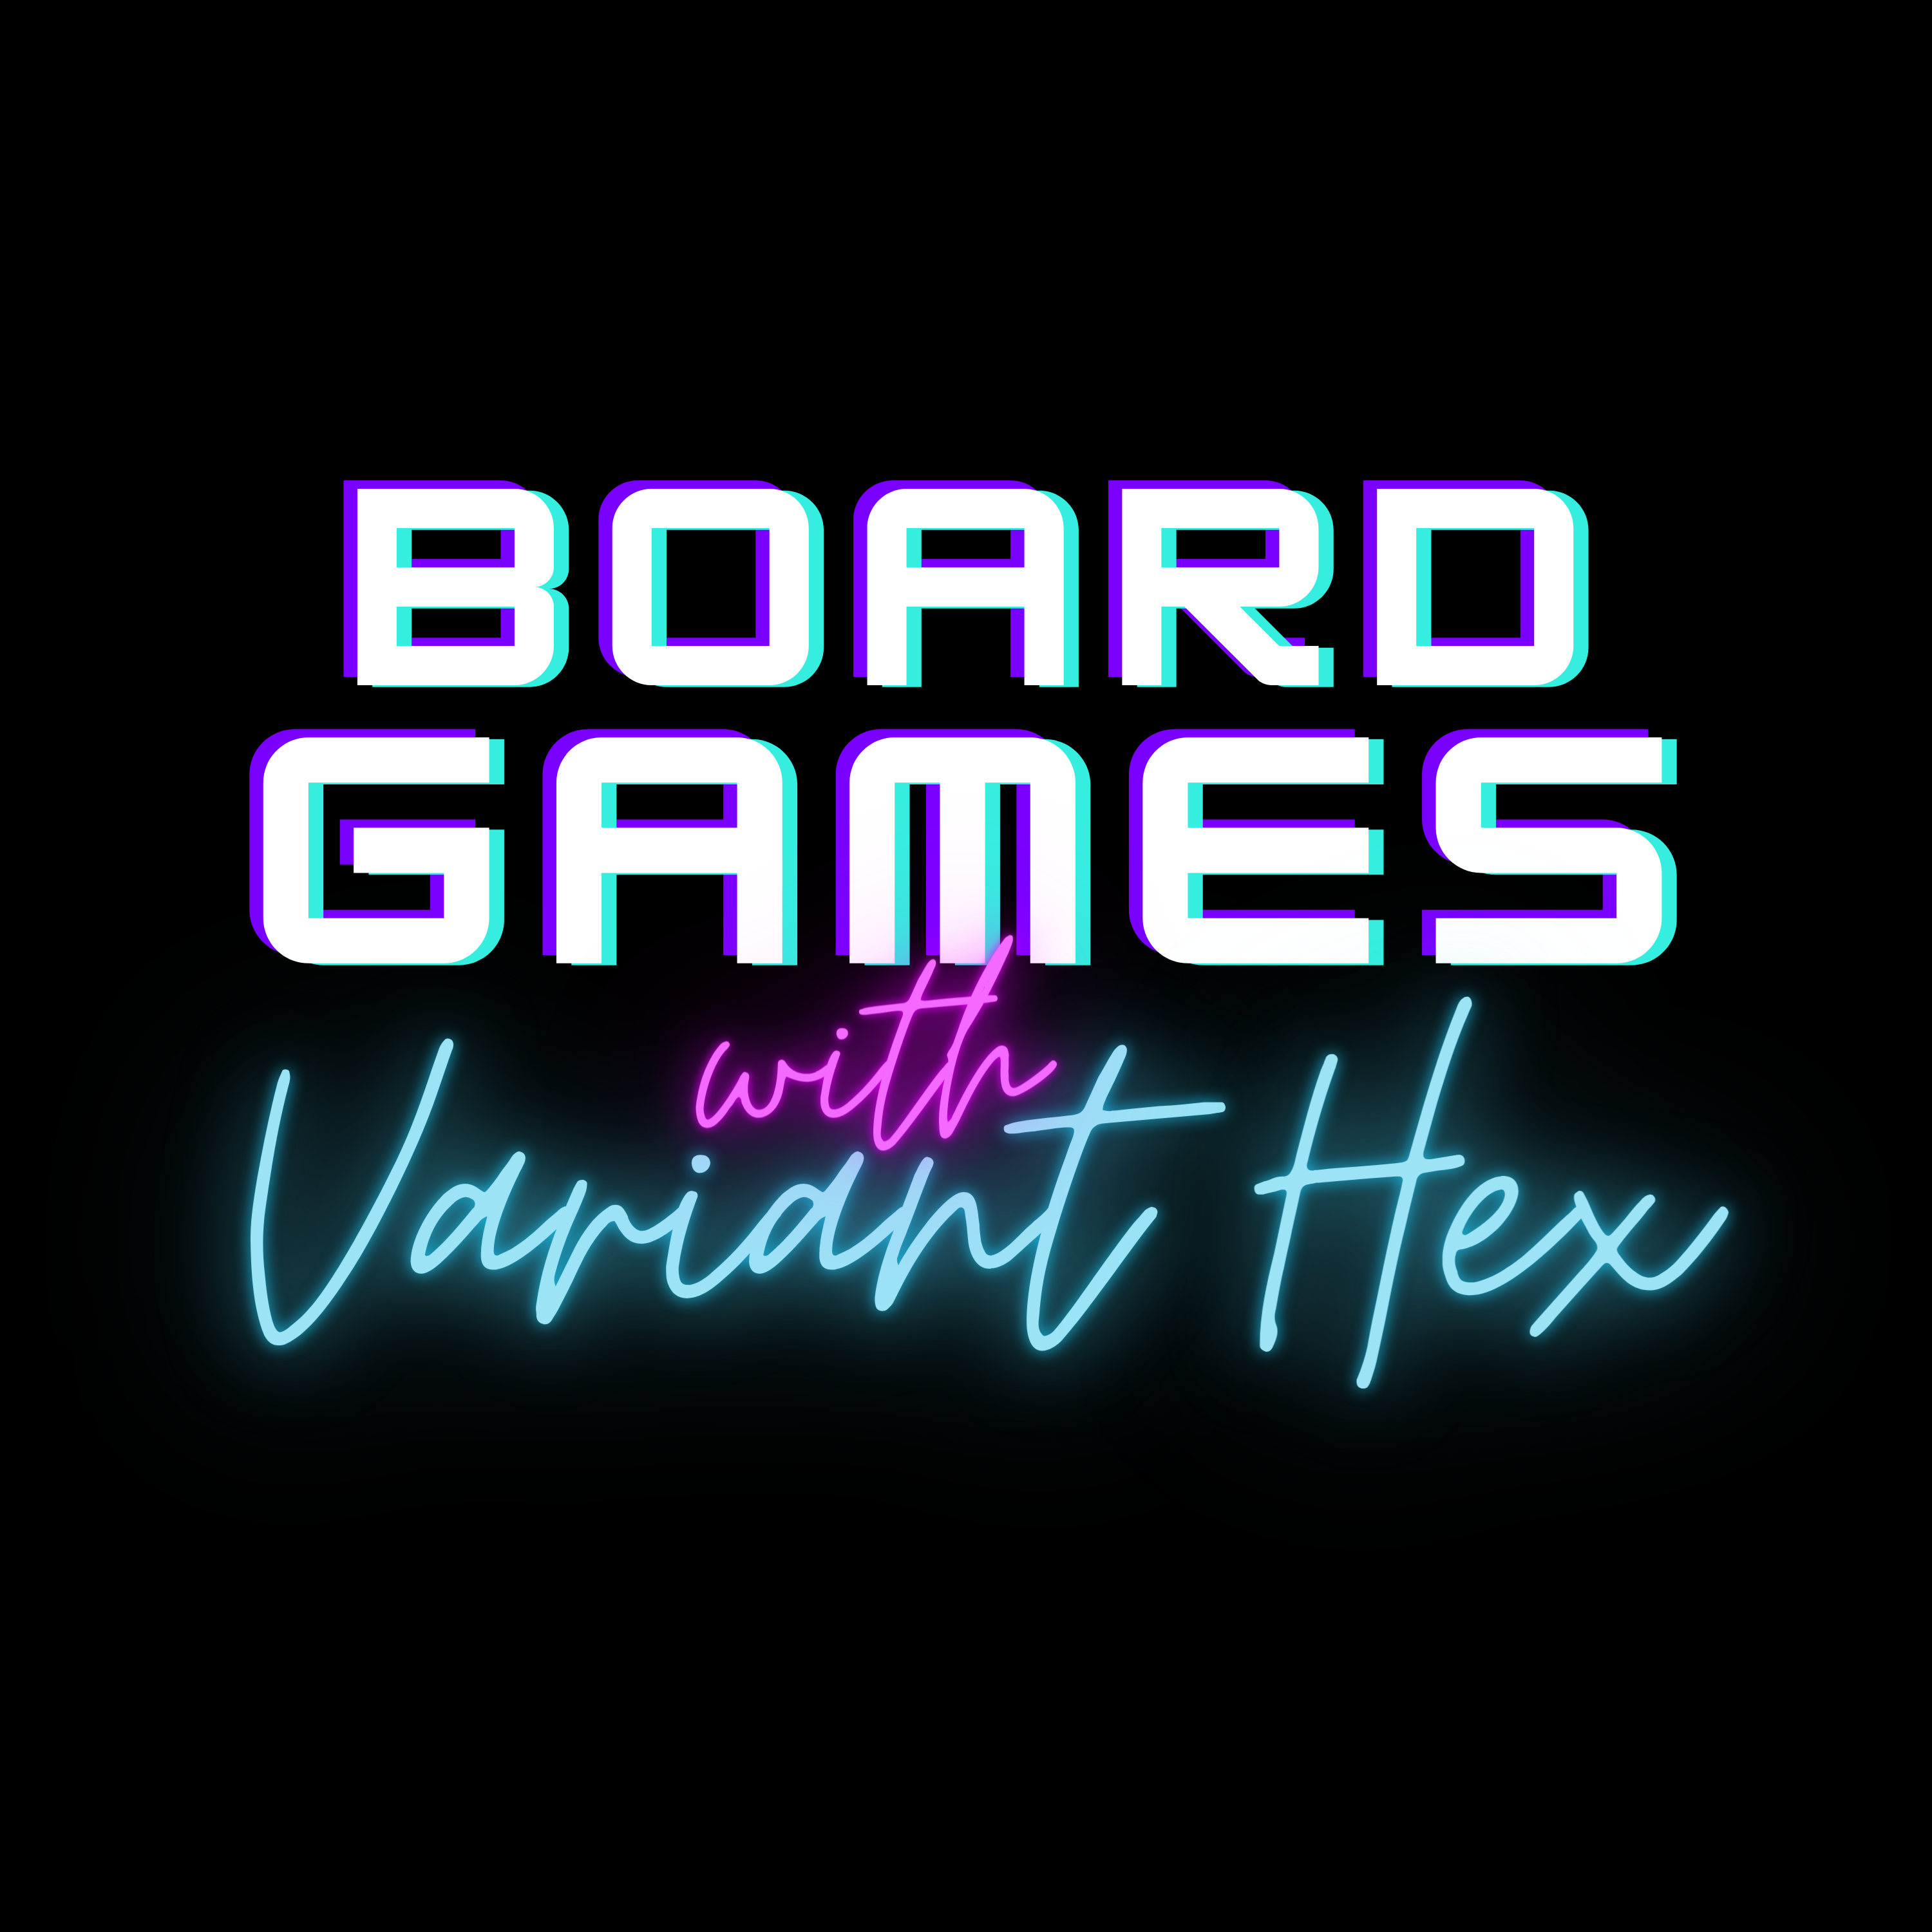 BOARD GAMES with Variant Hex